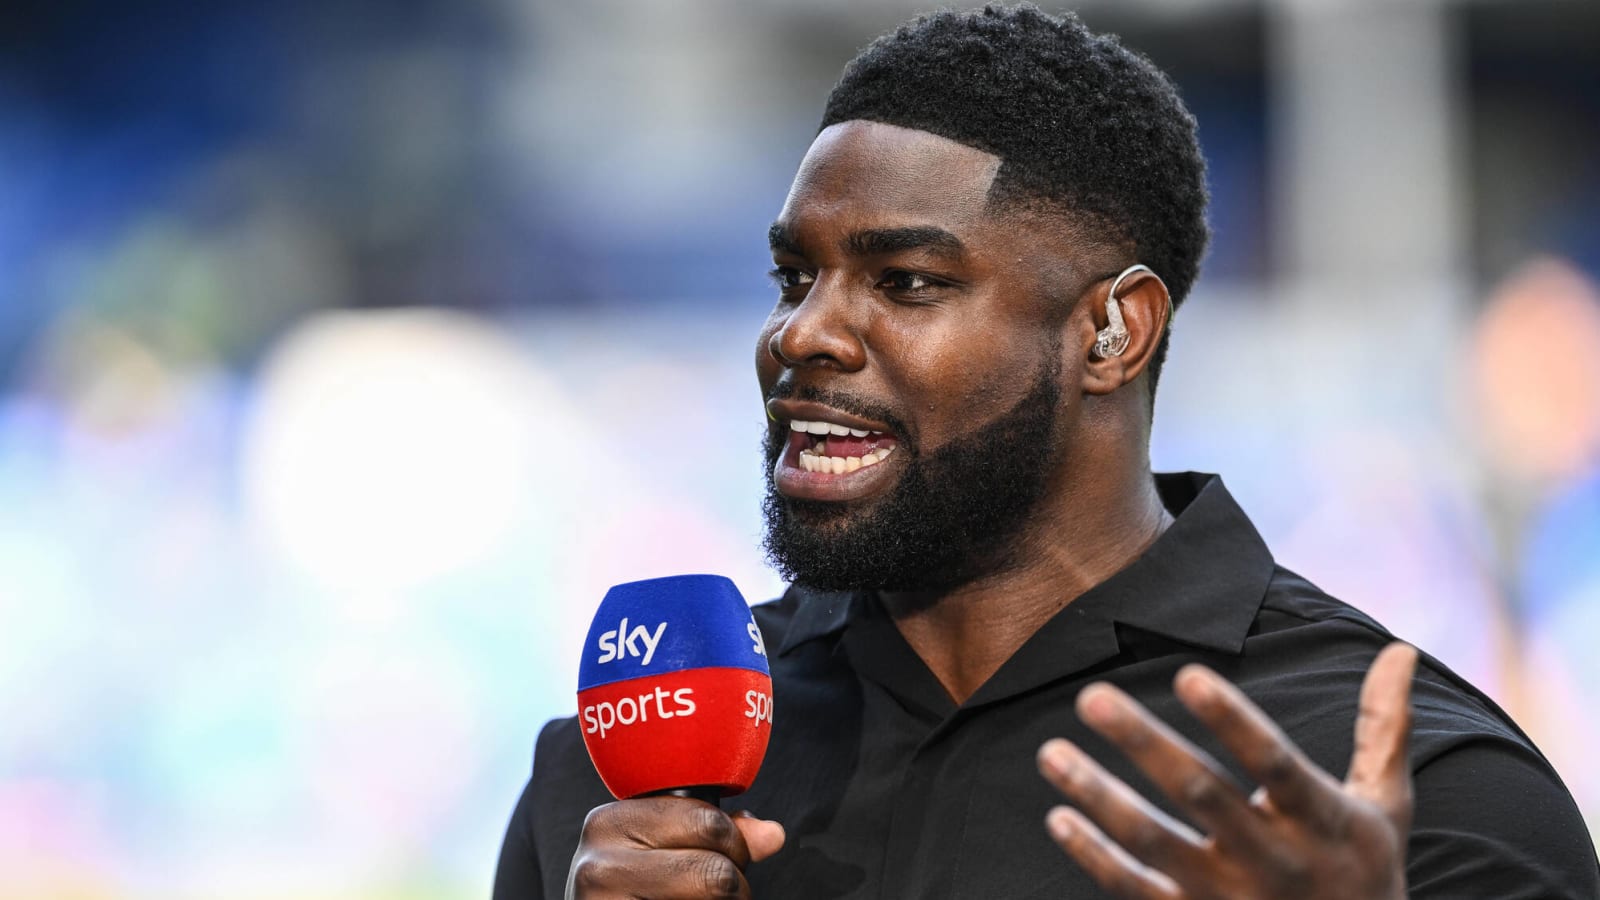 Micah Richards tells Arsenal where to improve to win the league